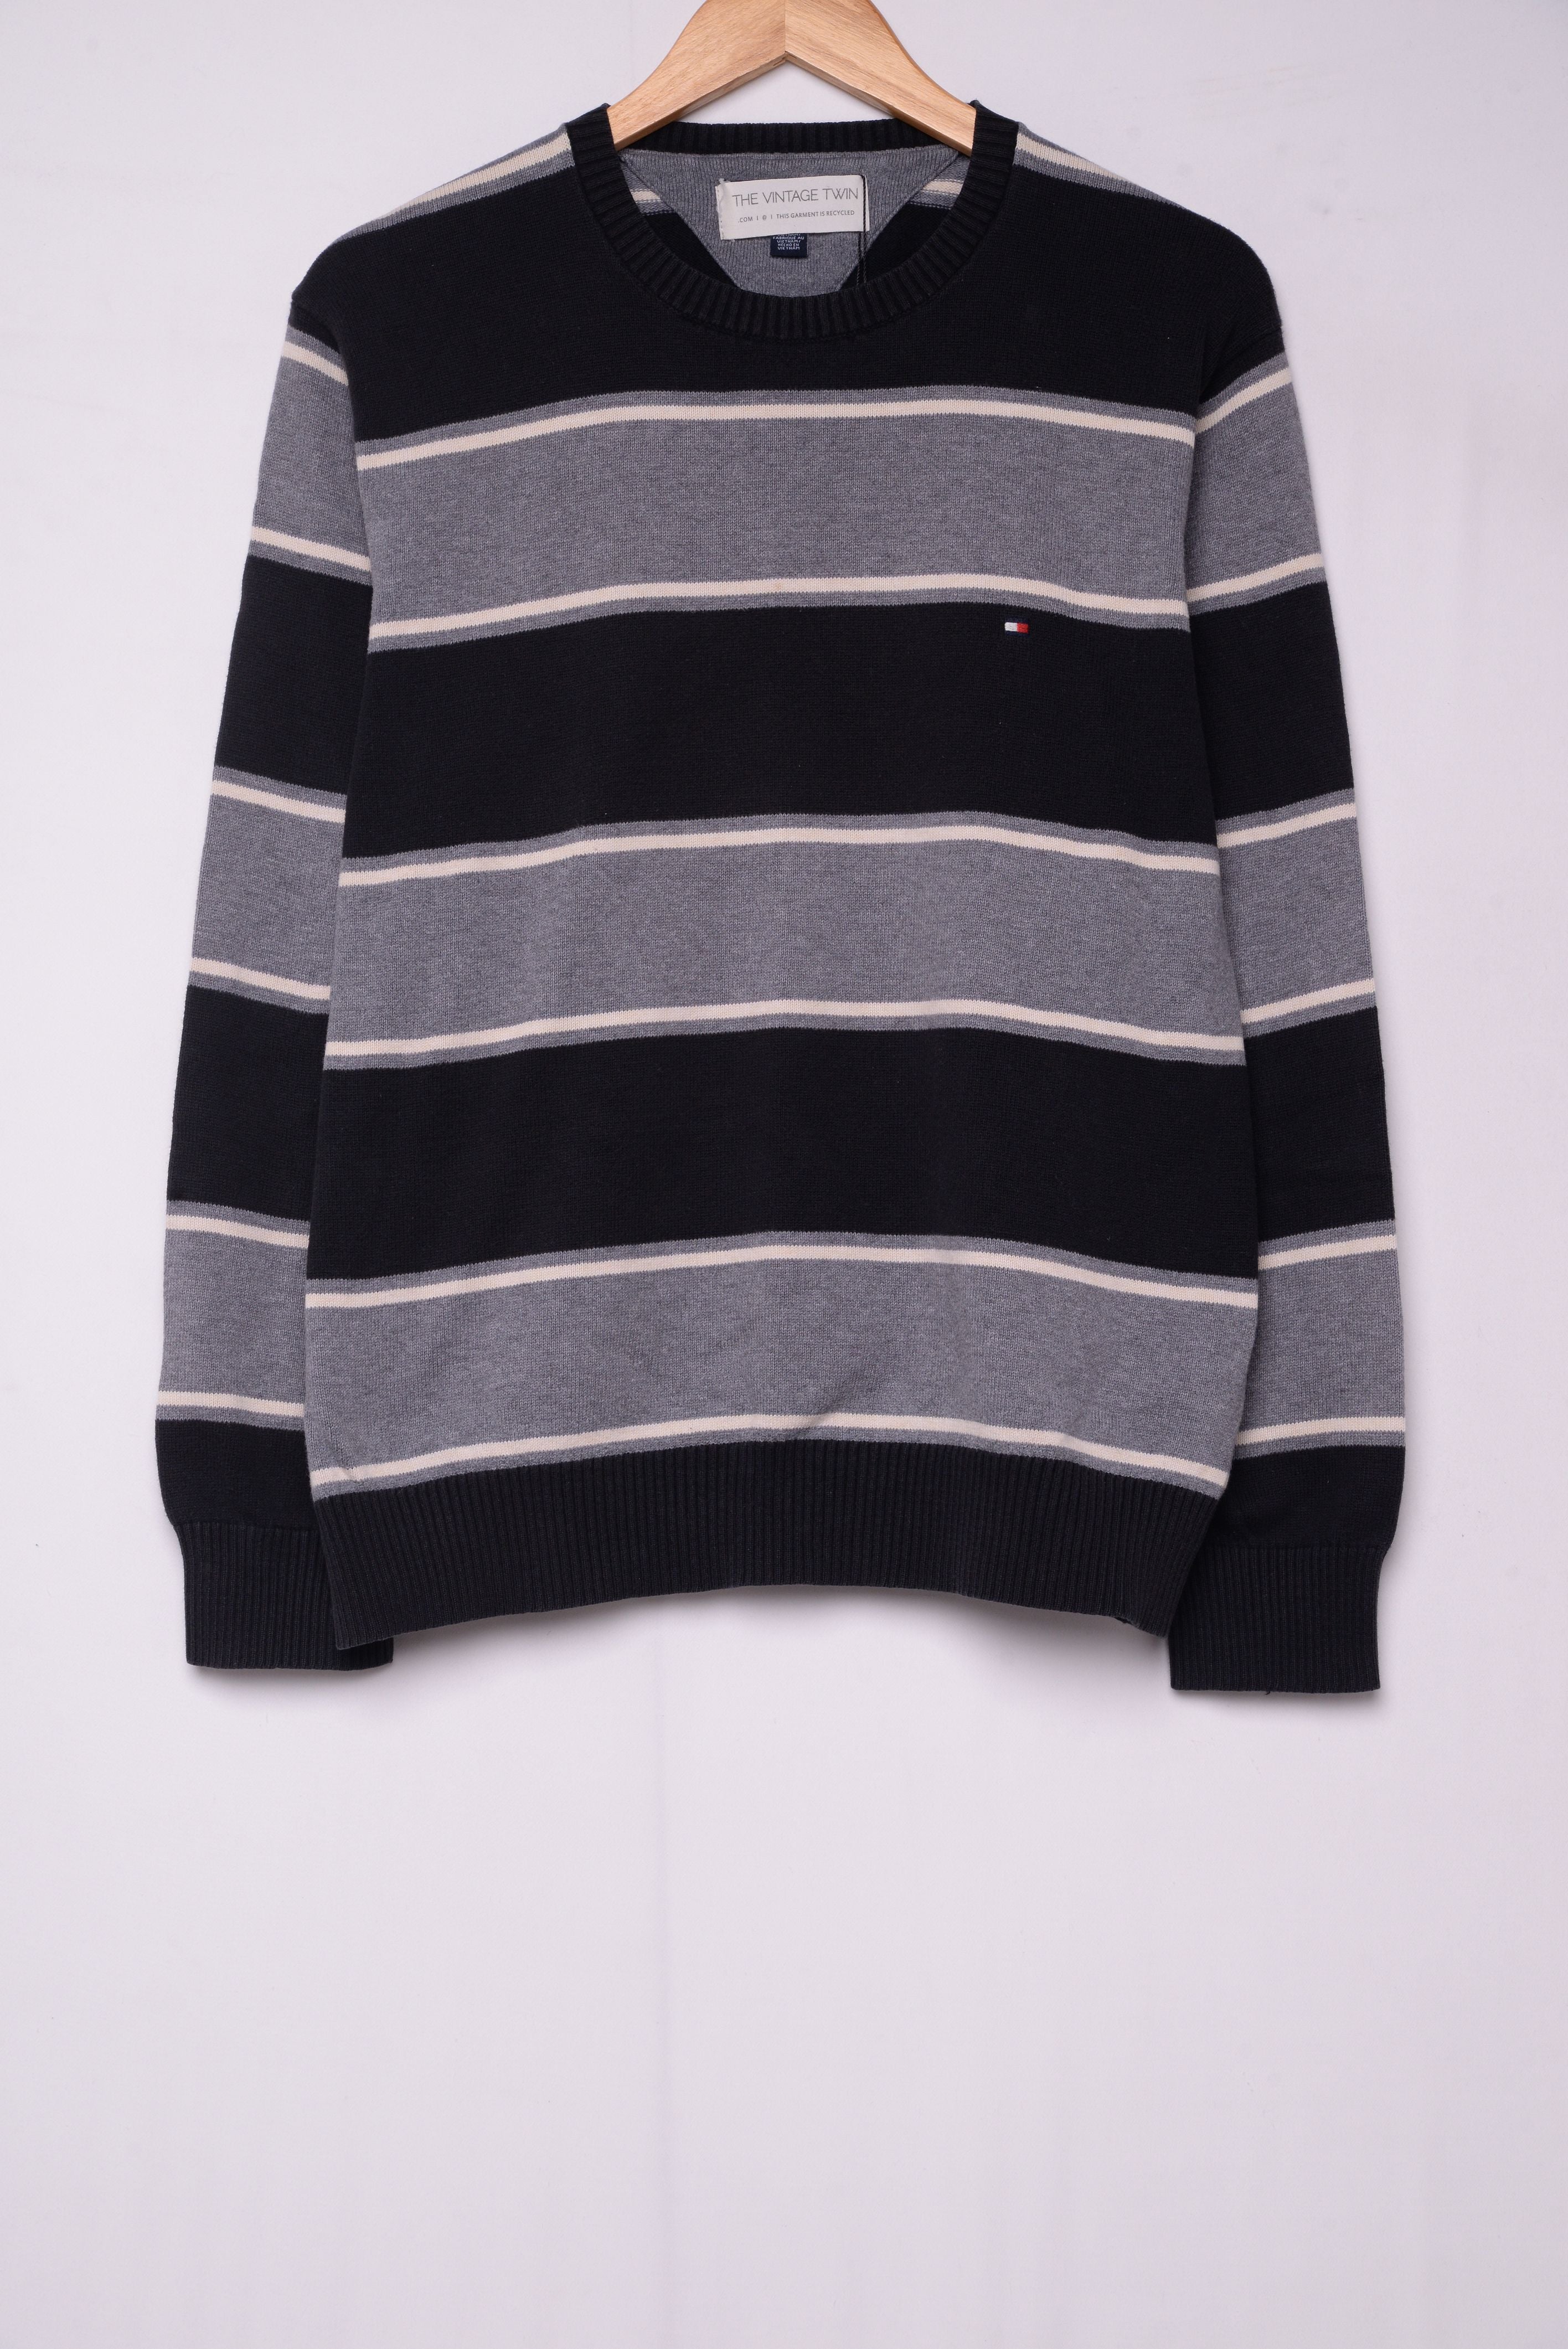 Tommy Hilfiger Sweater Free Shipping - Vintage Twin